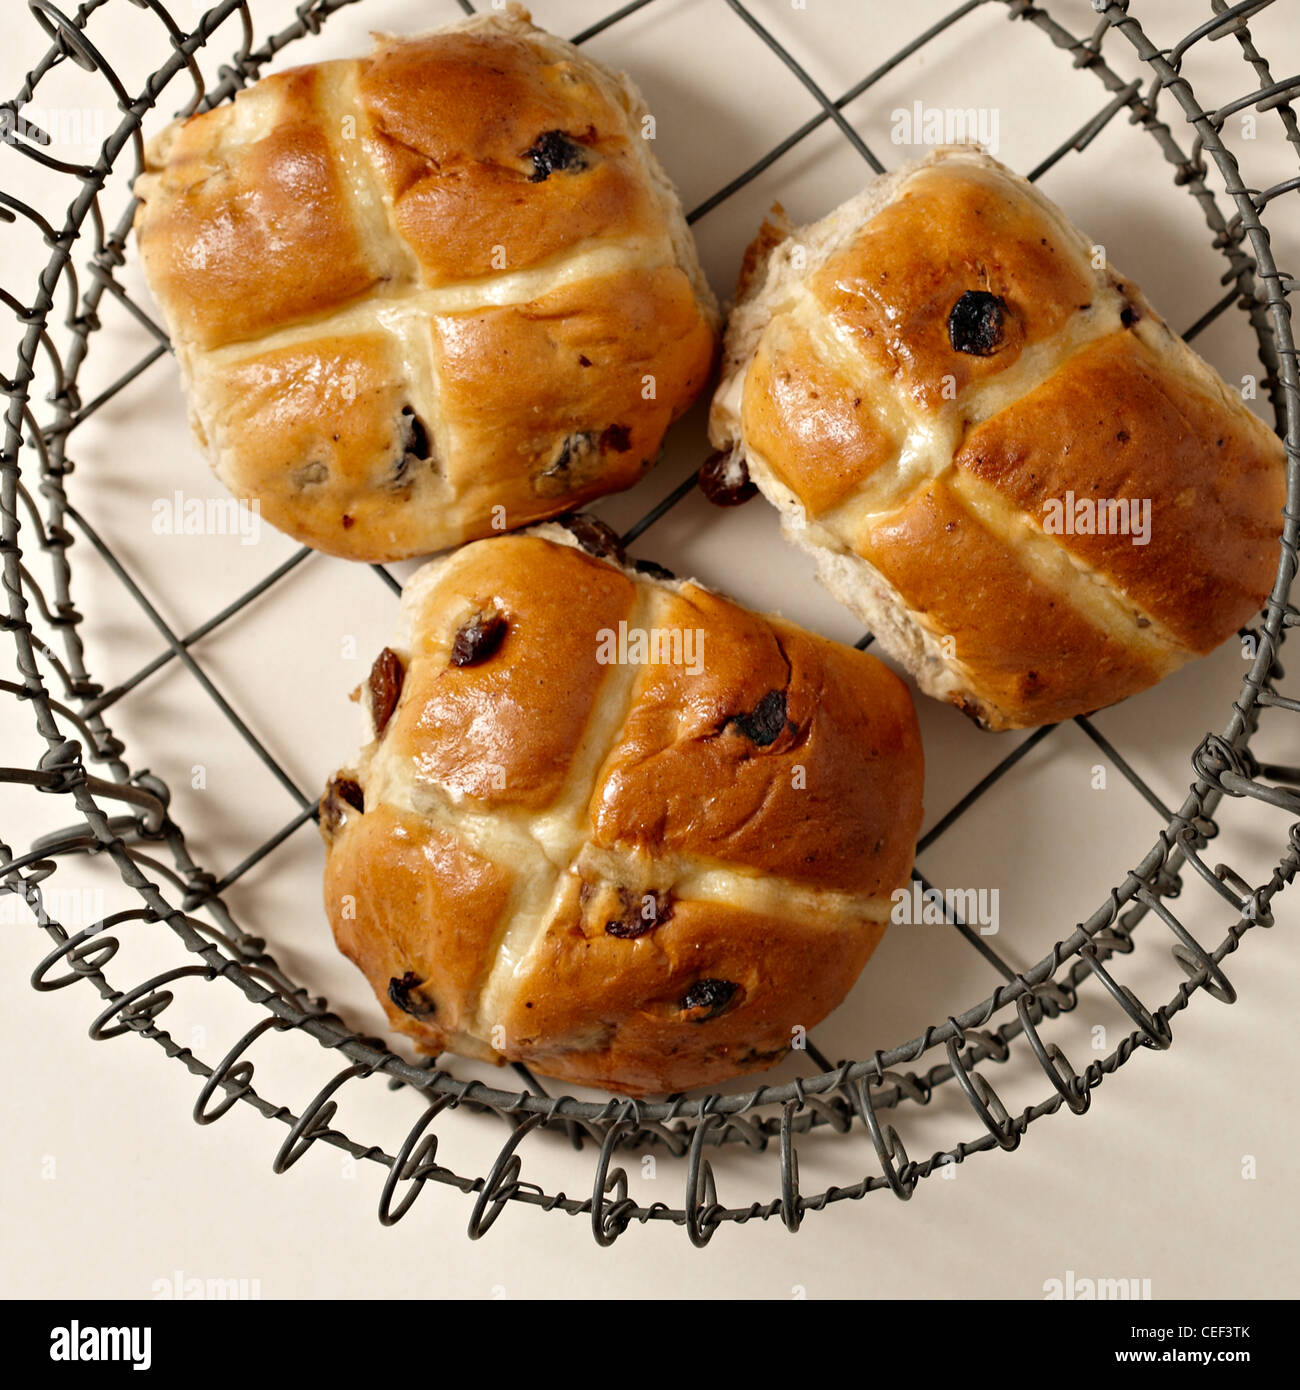 Hot cross buns on wire baking rack Stock Photo